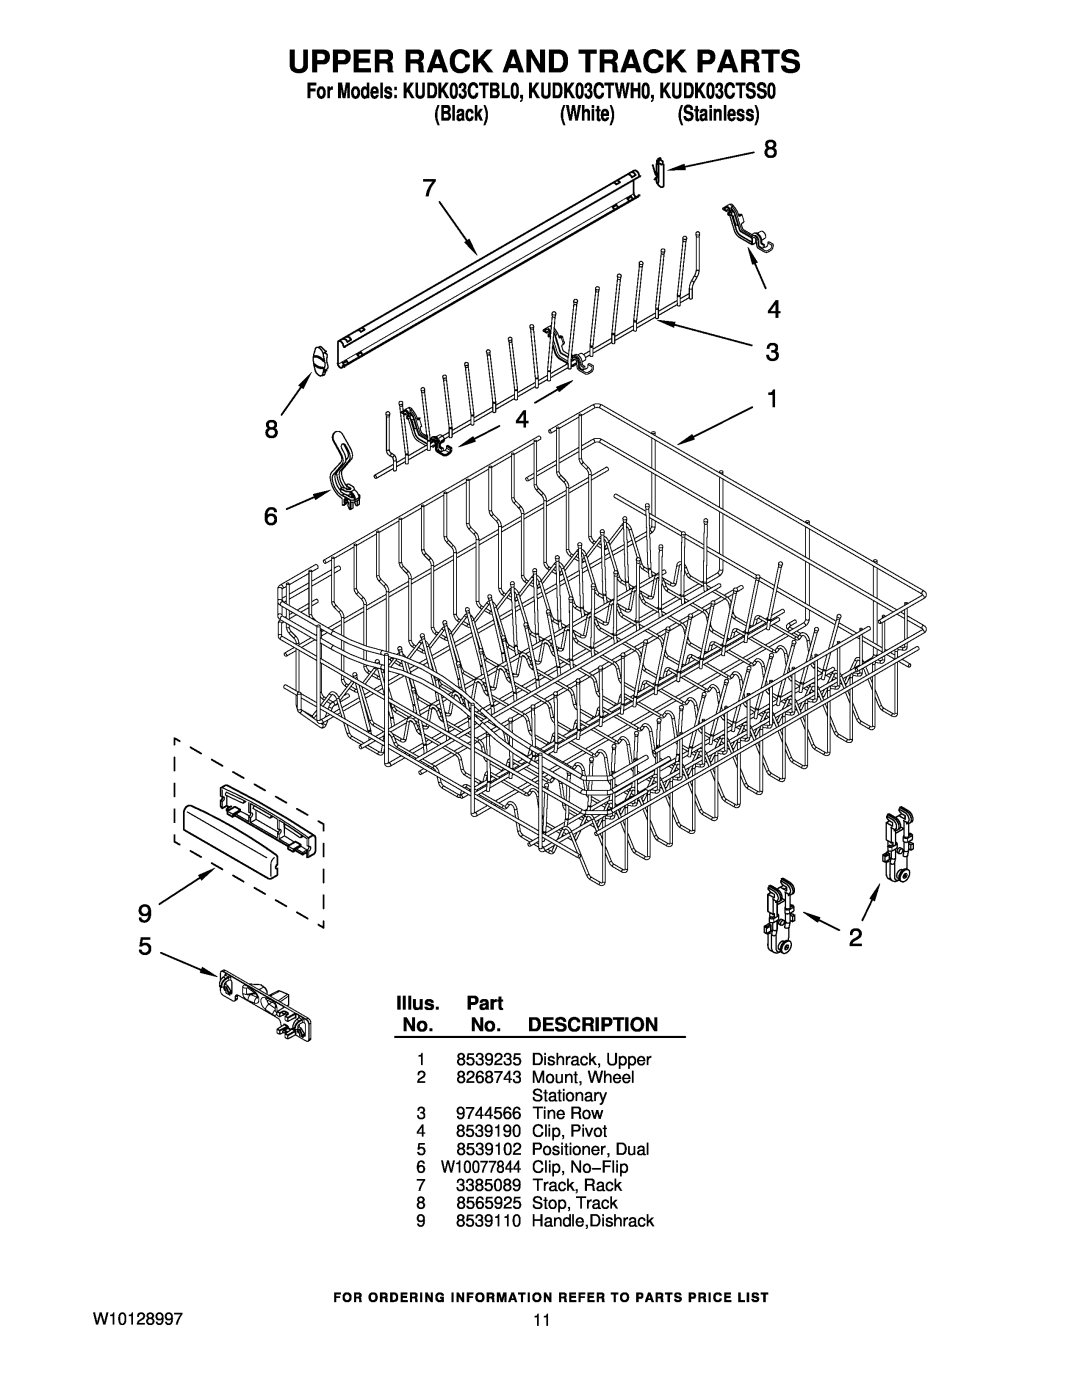 KitchenAid manual Upper Rack And Track Parts, For Models KUDK03CTBL0, KUDK03CTWH0, KUDK03CTSS0, Black White Stainless 